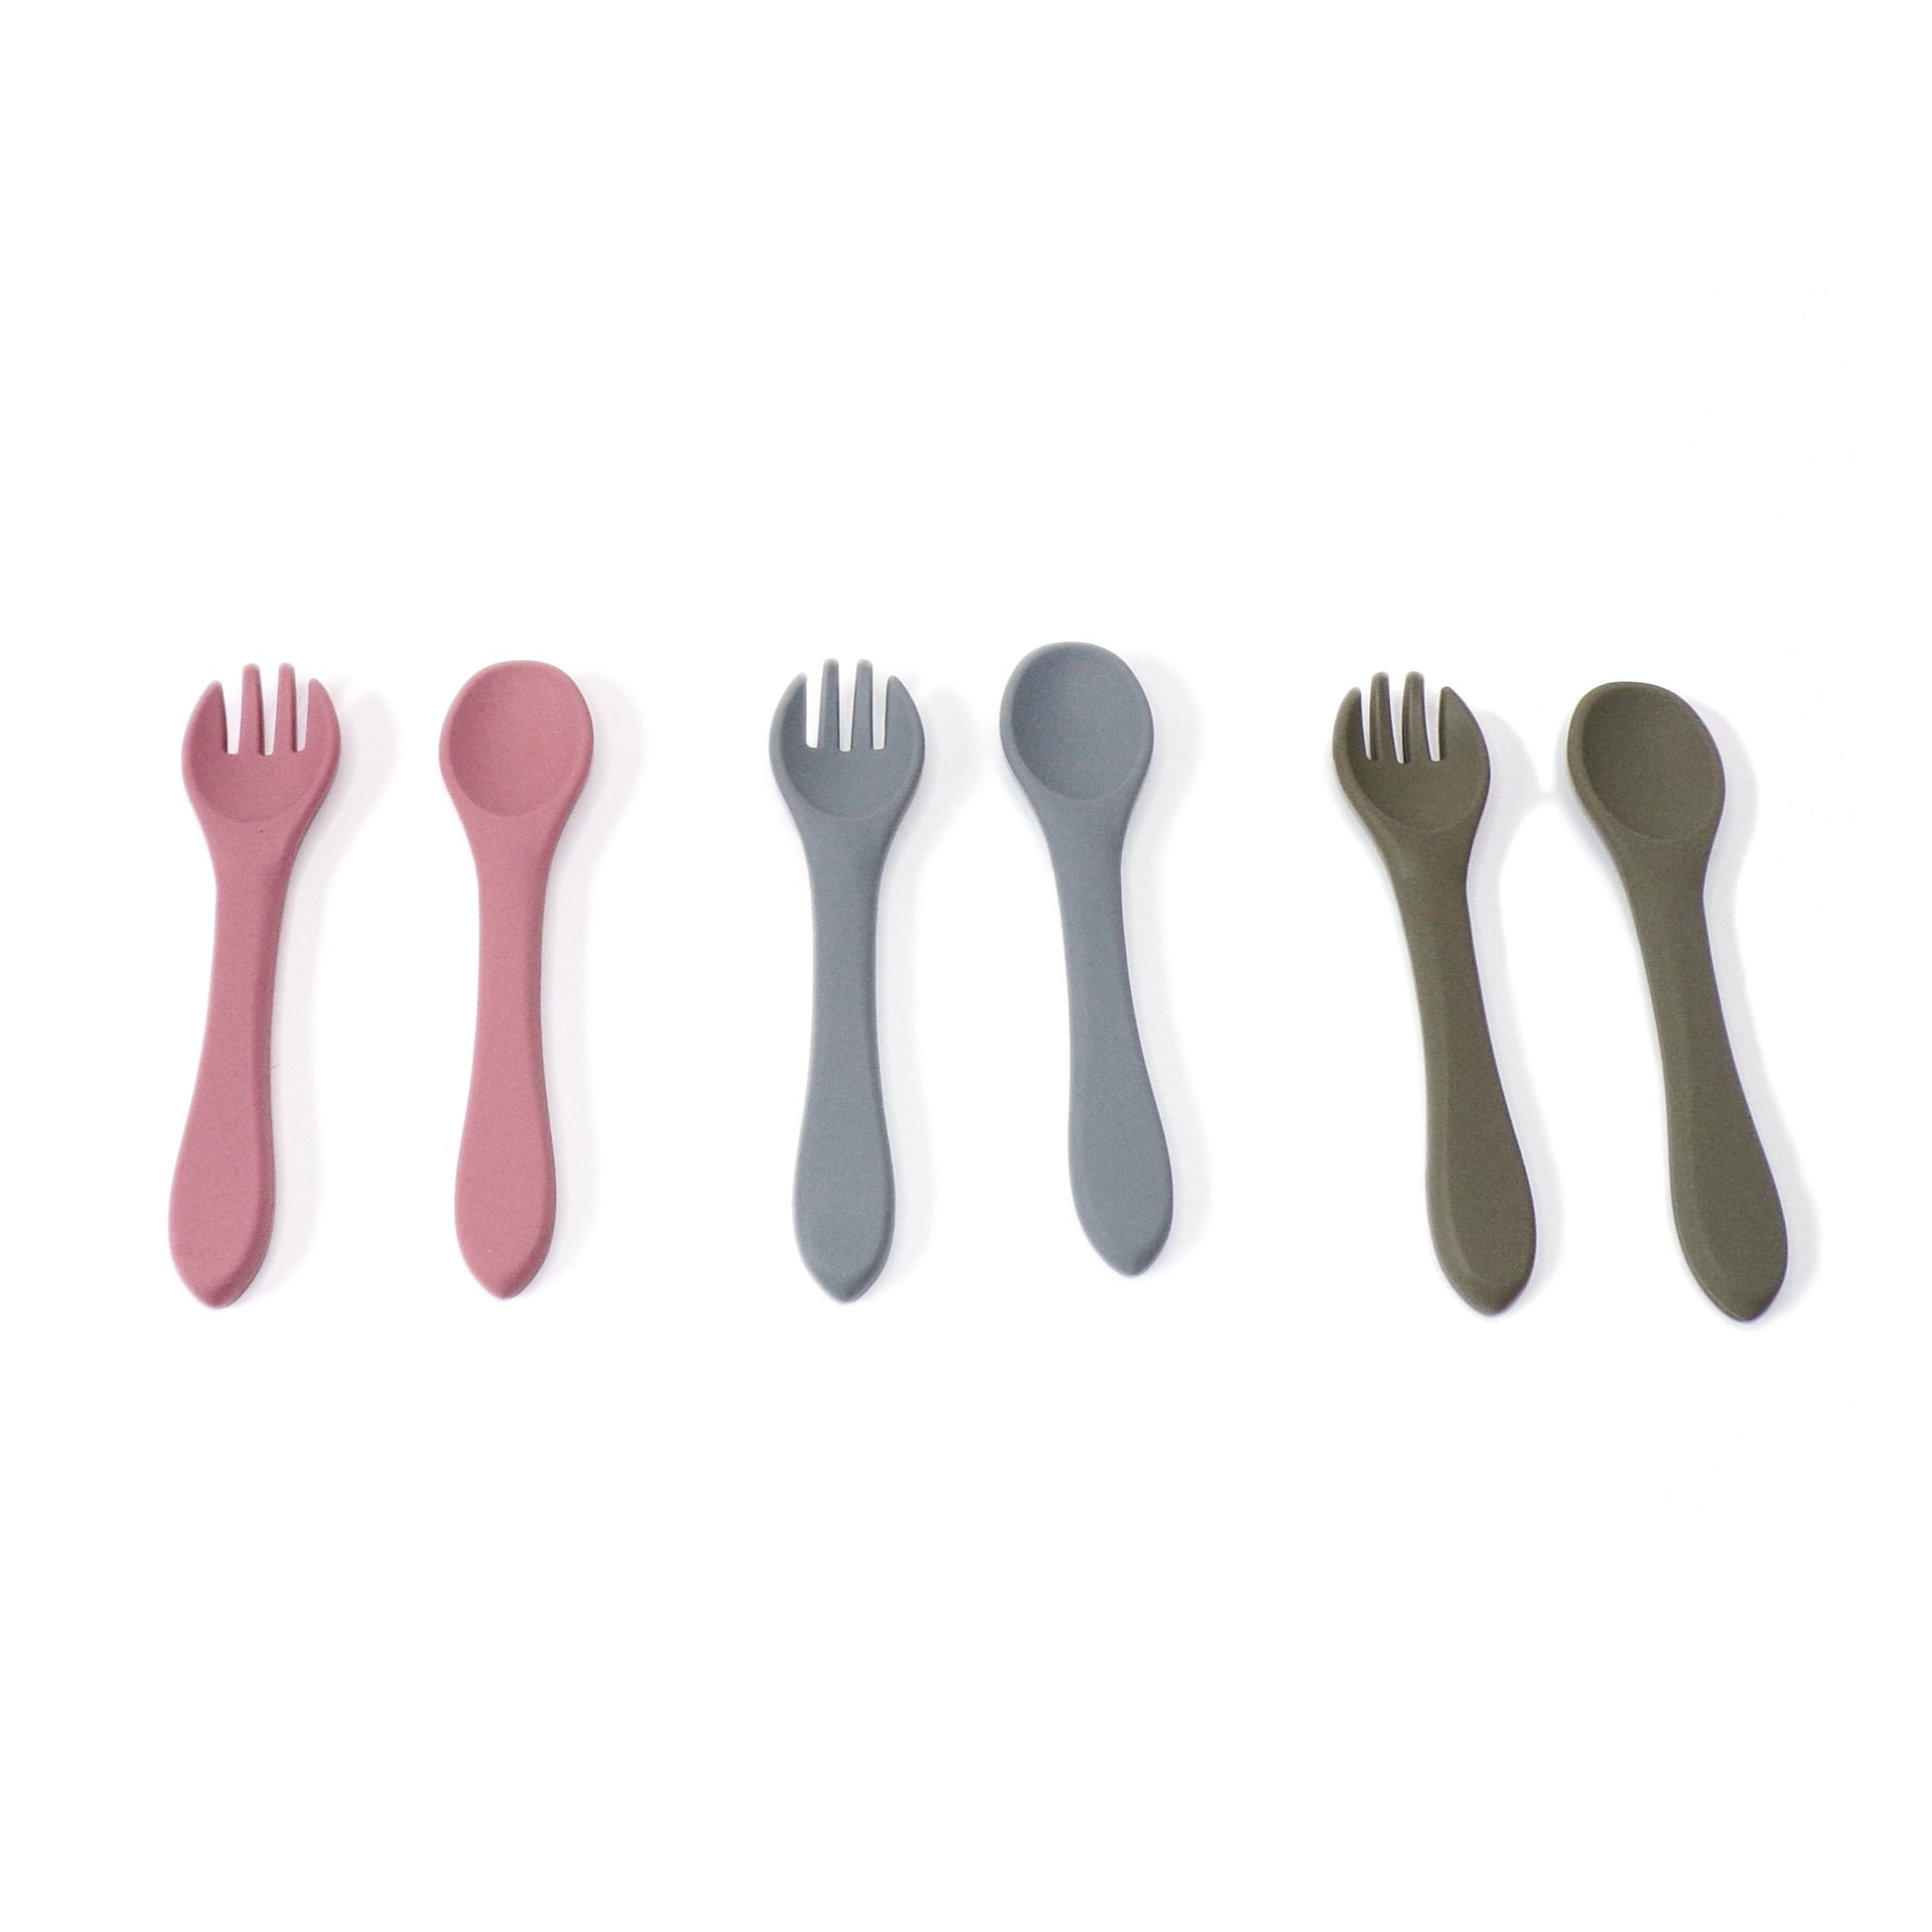 Three sets of silicone cutlery, a fork and spoon, in colours pink, blue and green. The utensils are designed for young children.